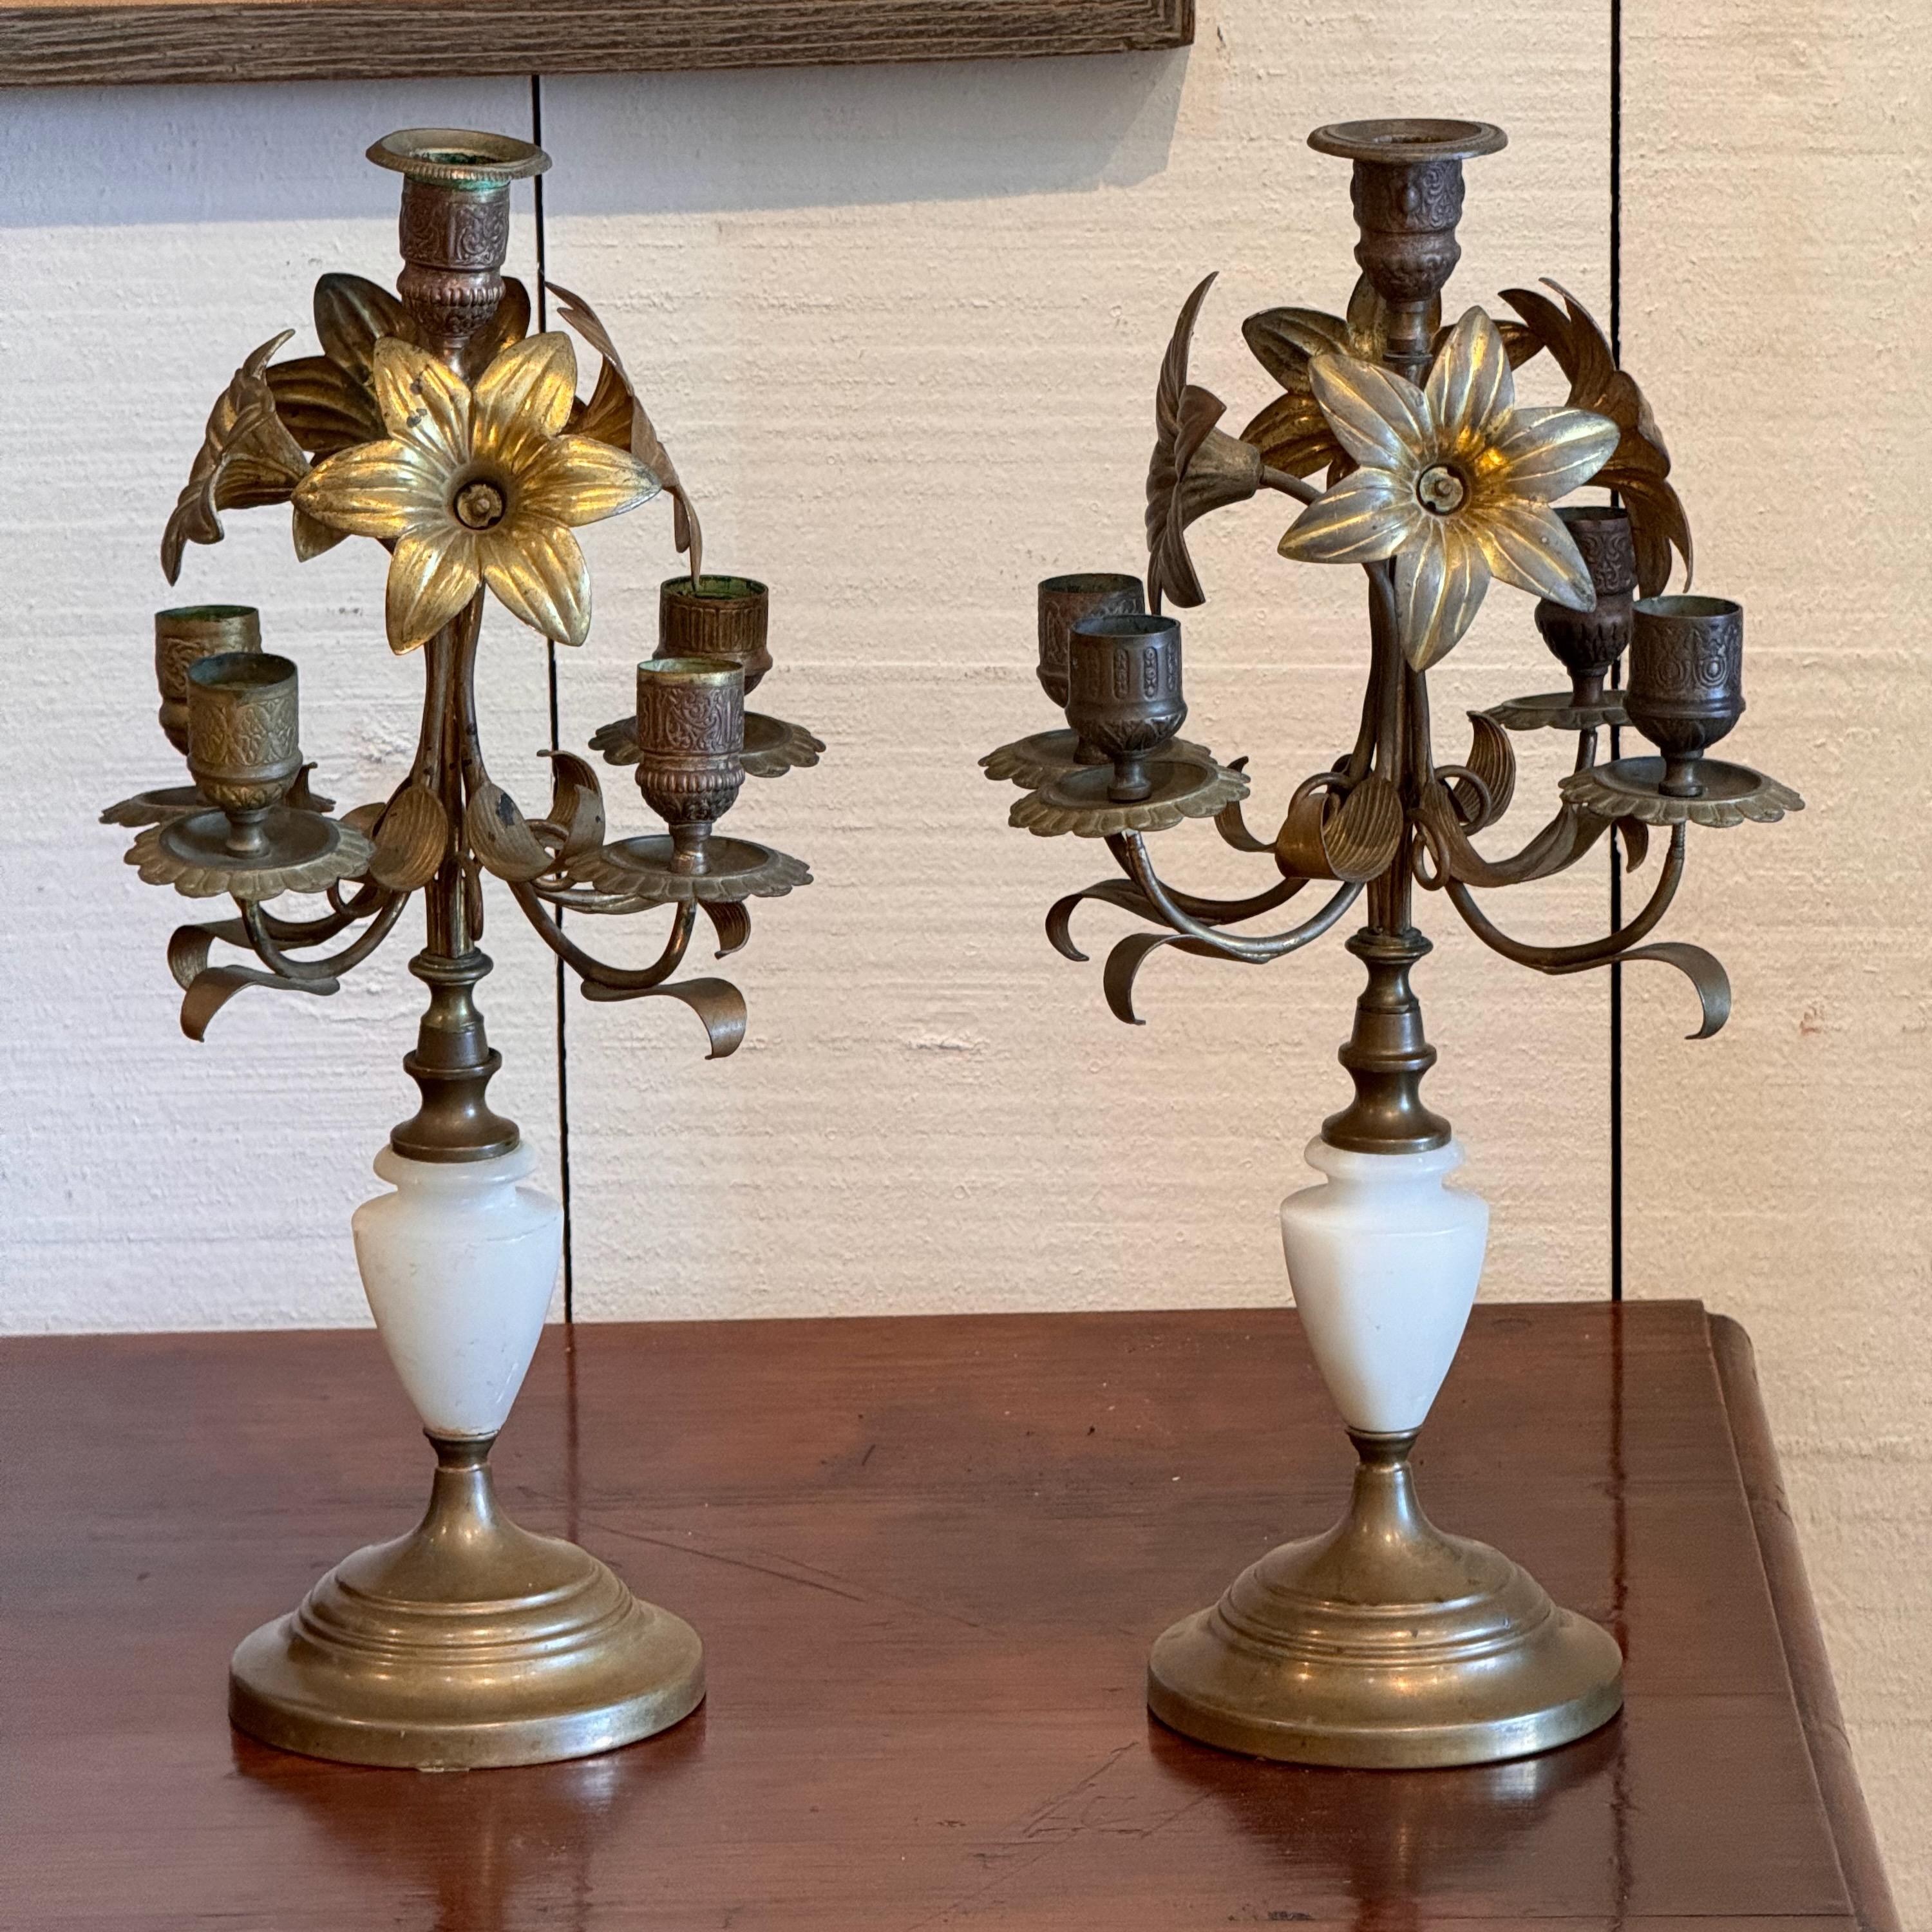 Flowers and candles. With marble and brass. Made in the Late 19th Century.